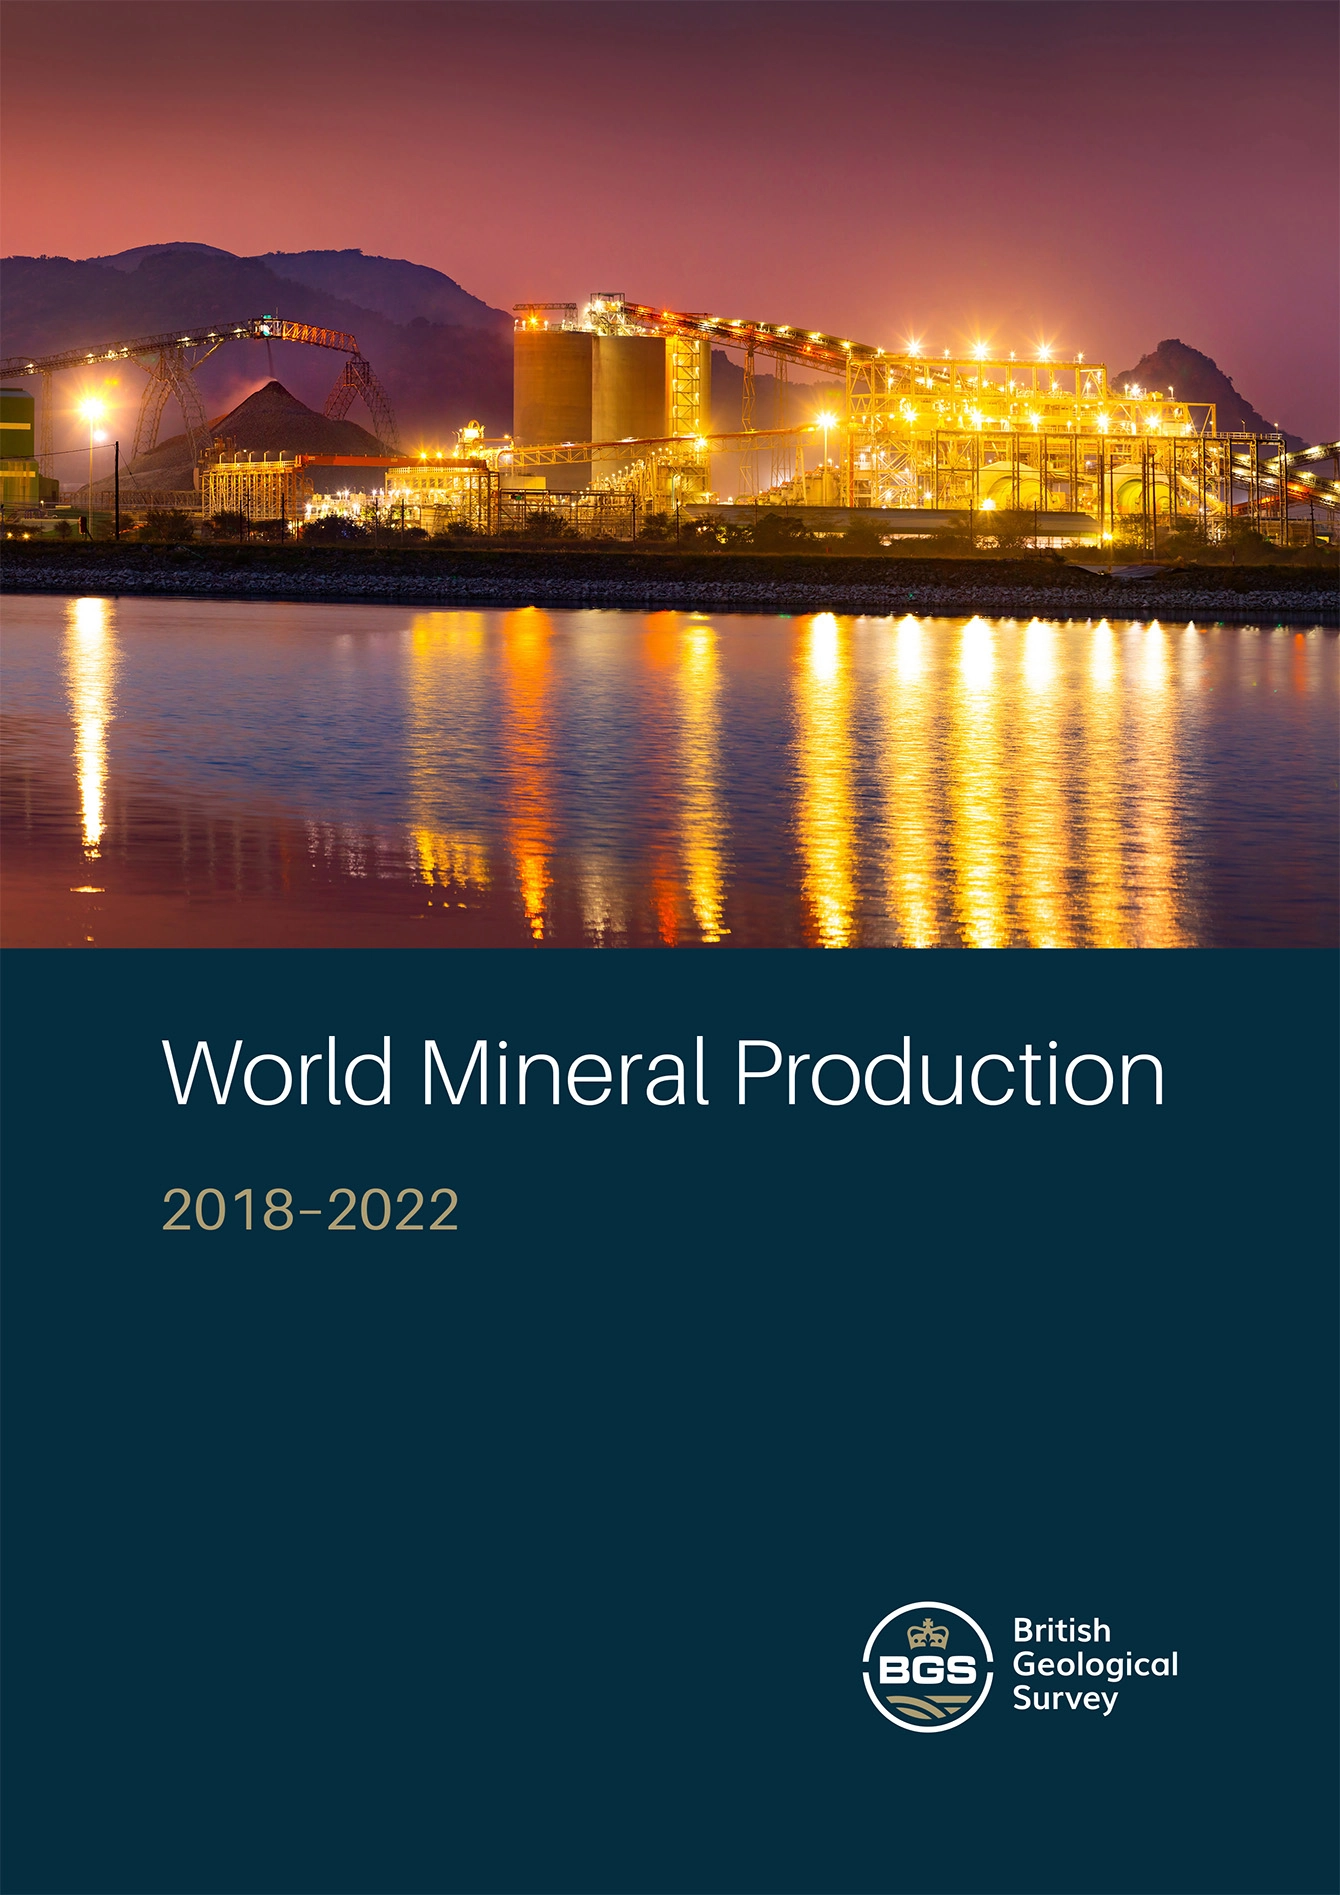 Download World Mineral Production 2018-2022